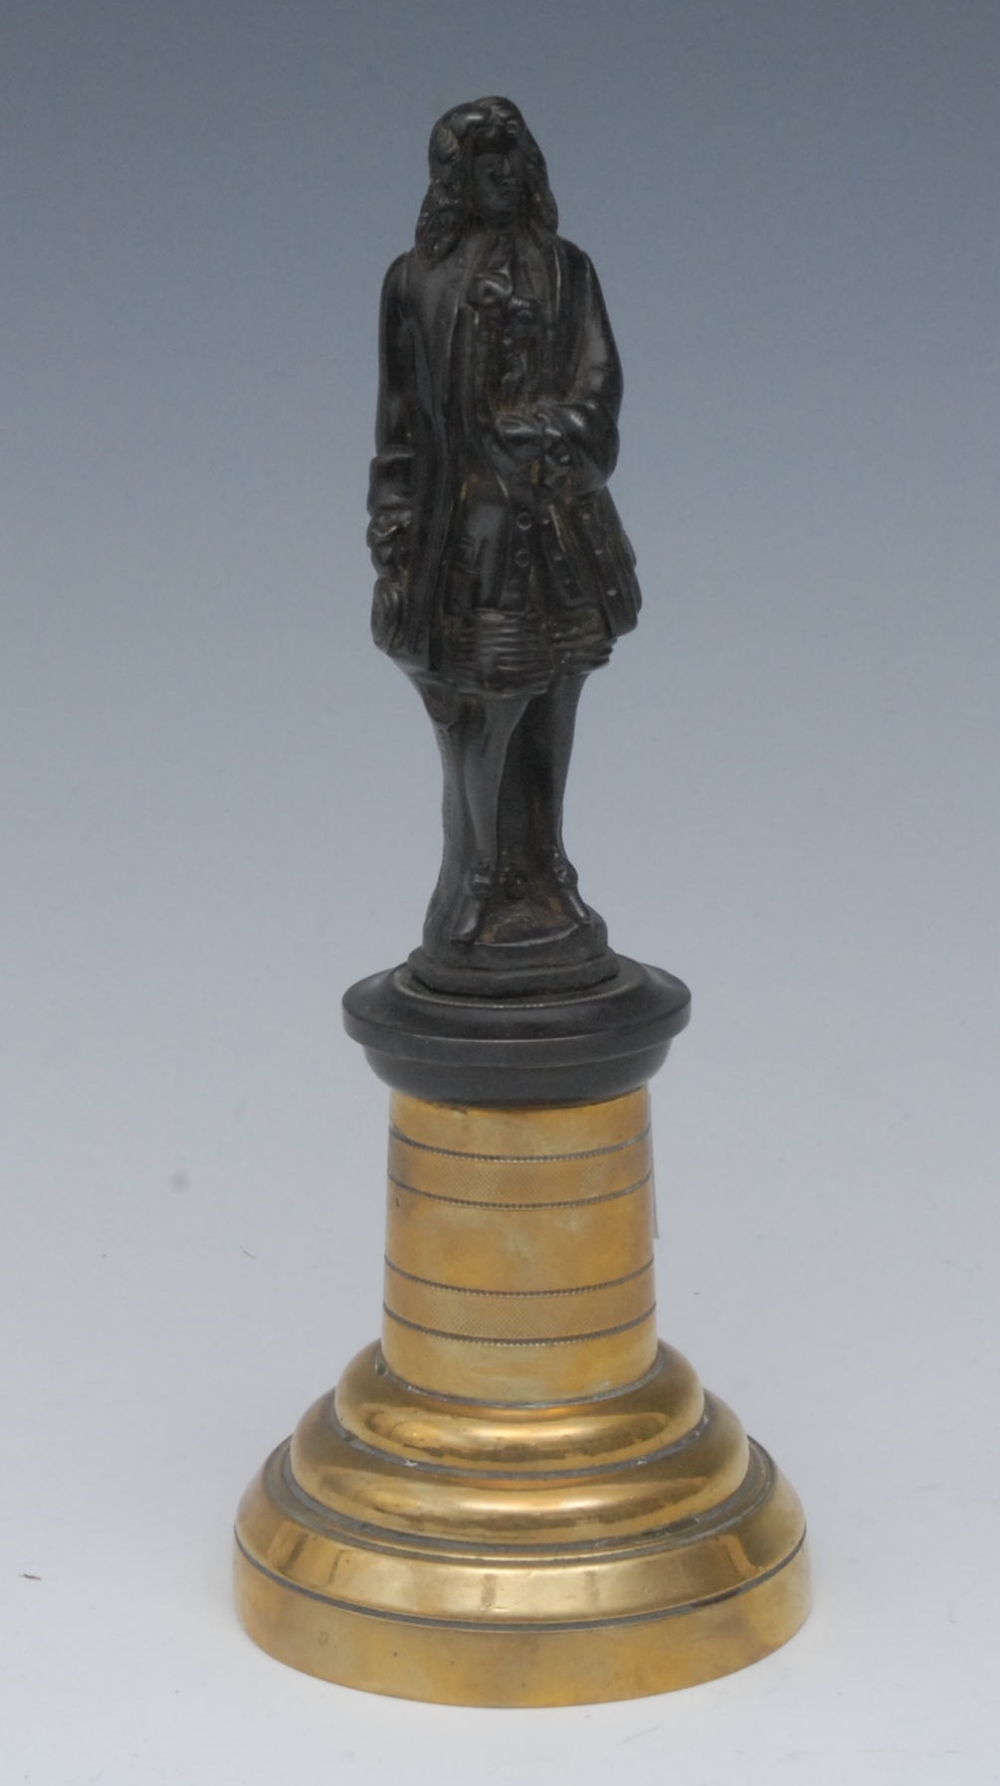 A 19th century dark patinated bronze desk model, of a gentleman in 17th century dress, polished